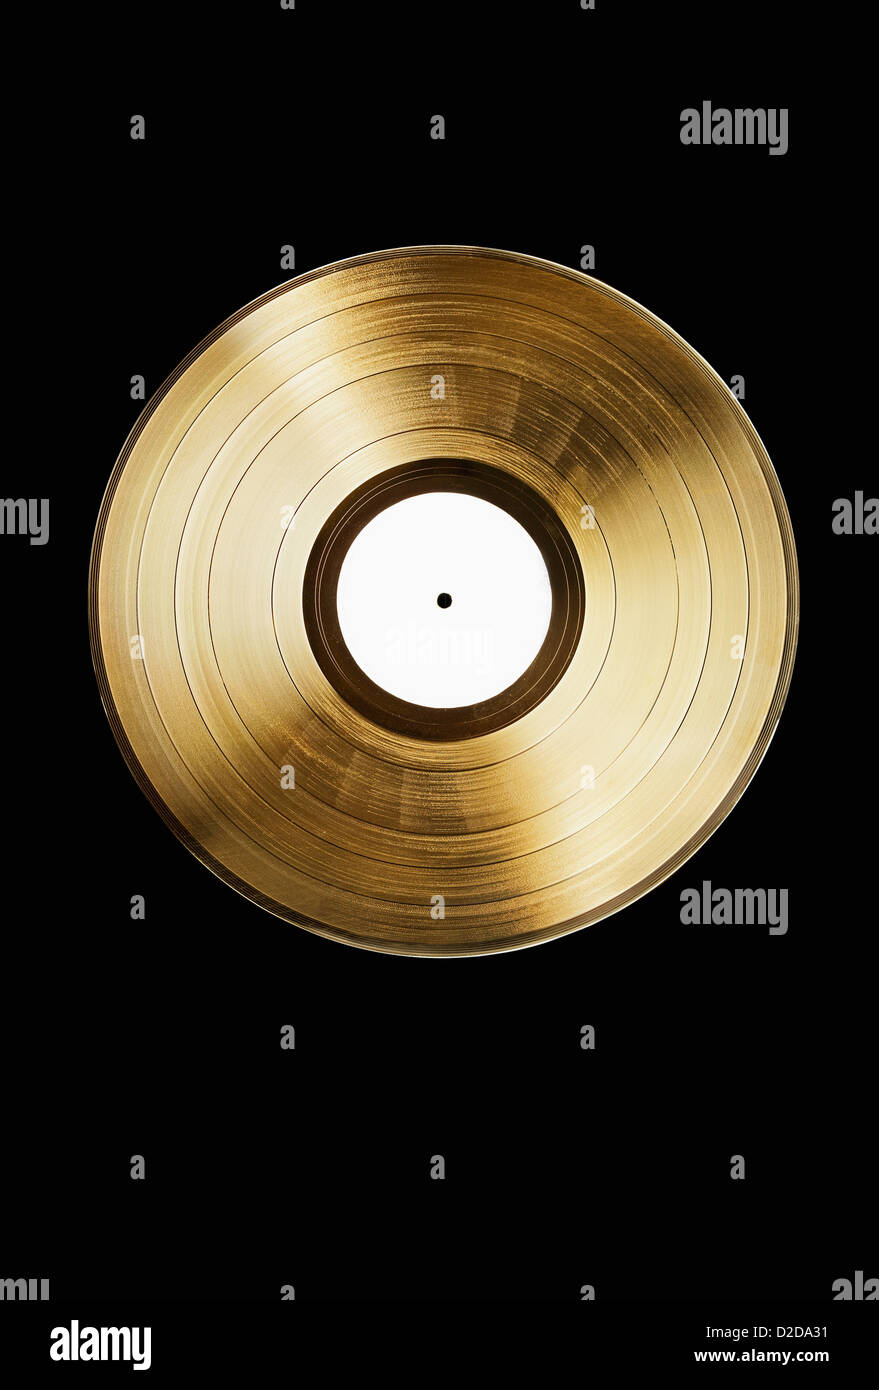 A gold record on a black background Stock Photo